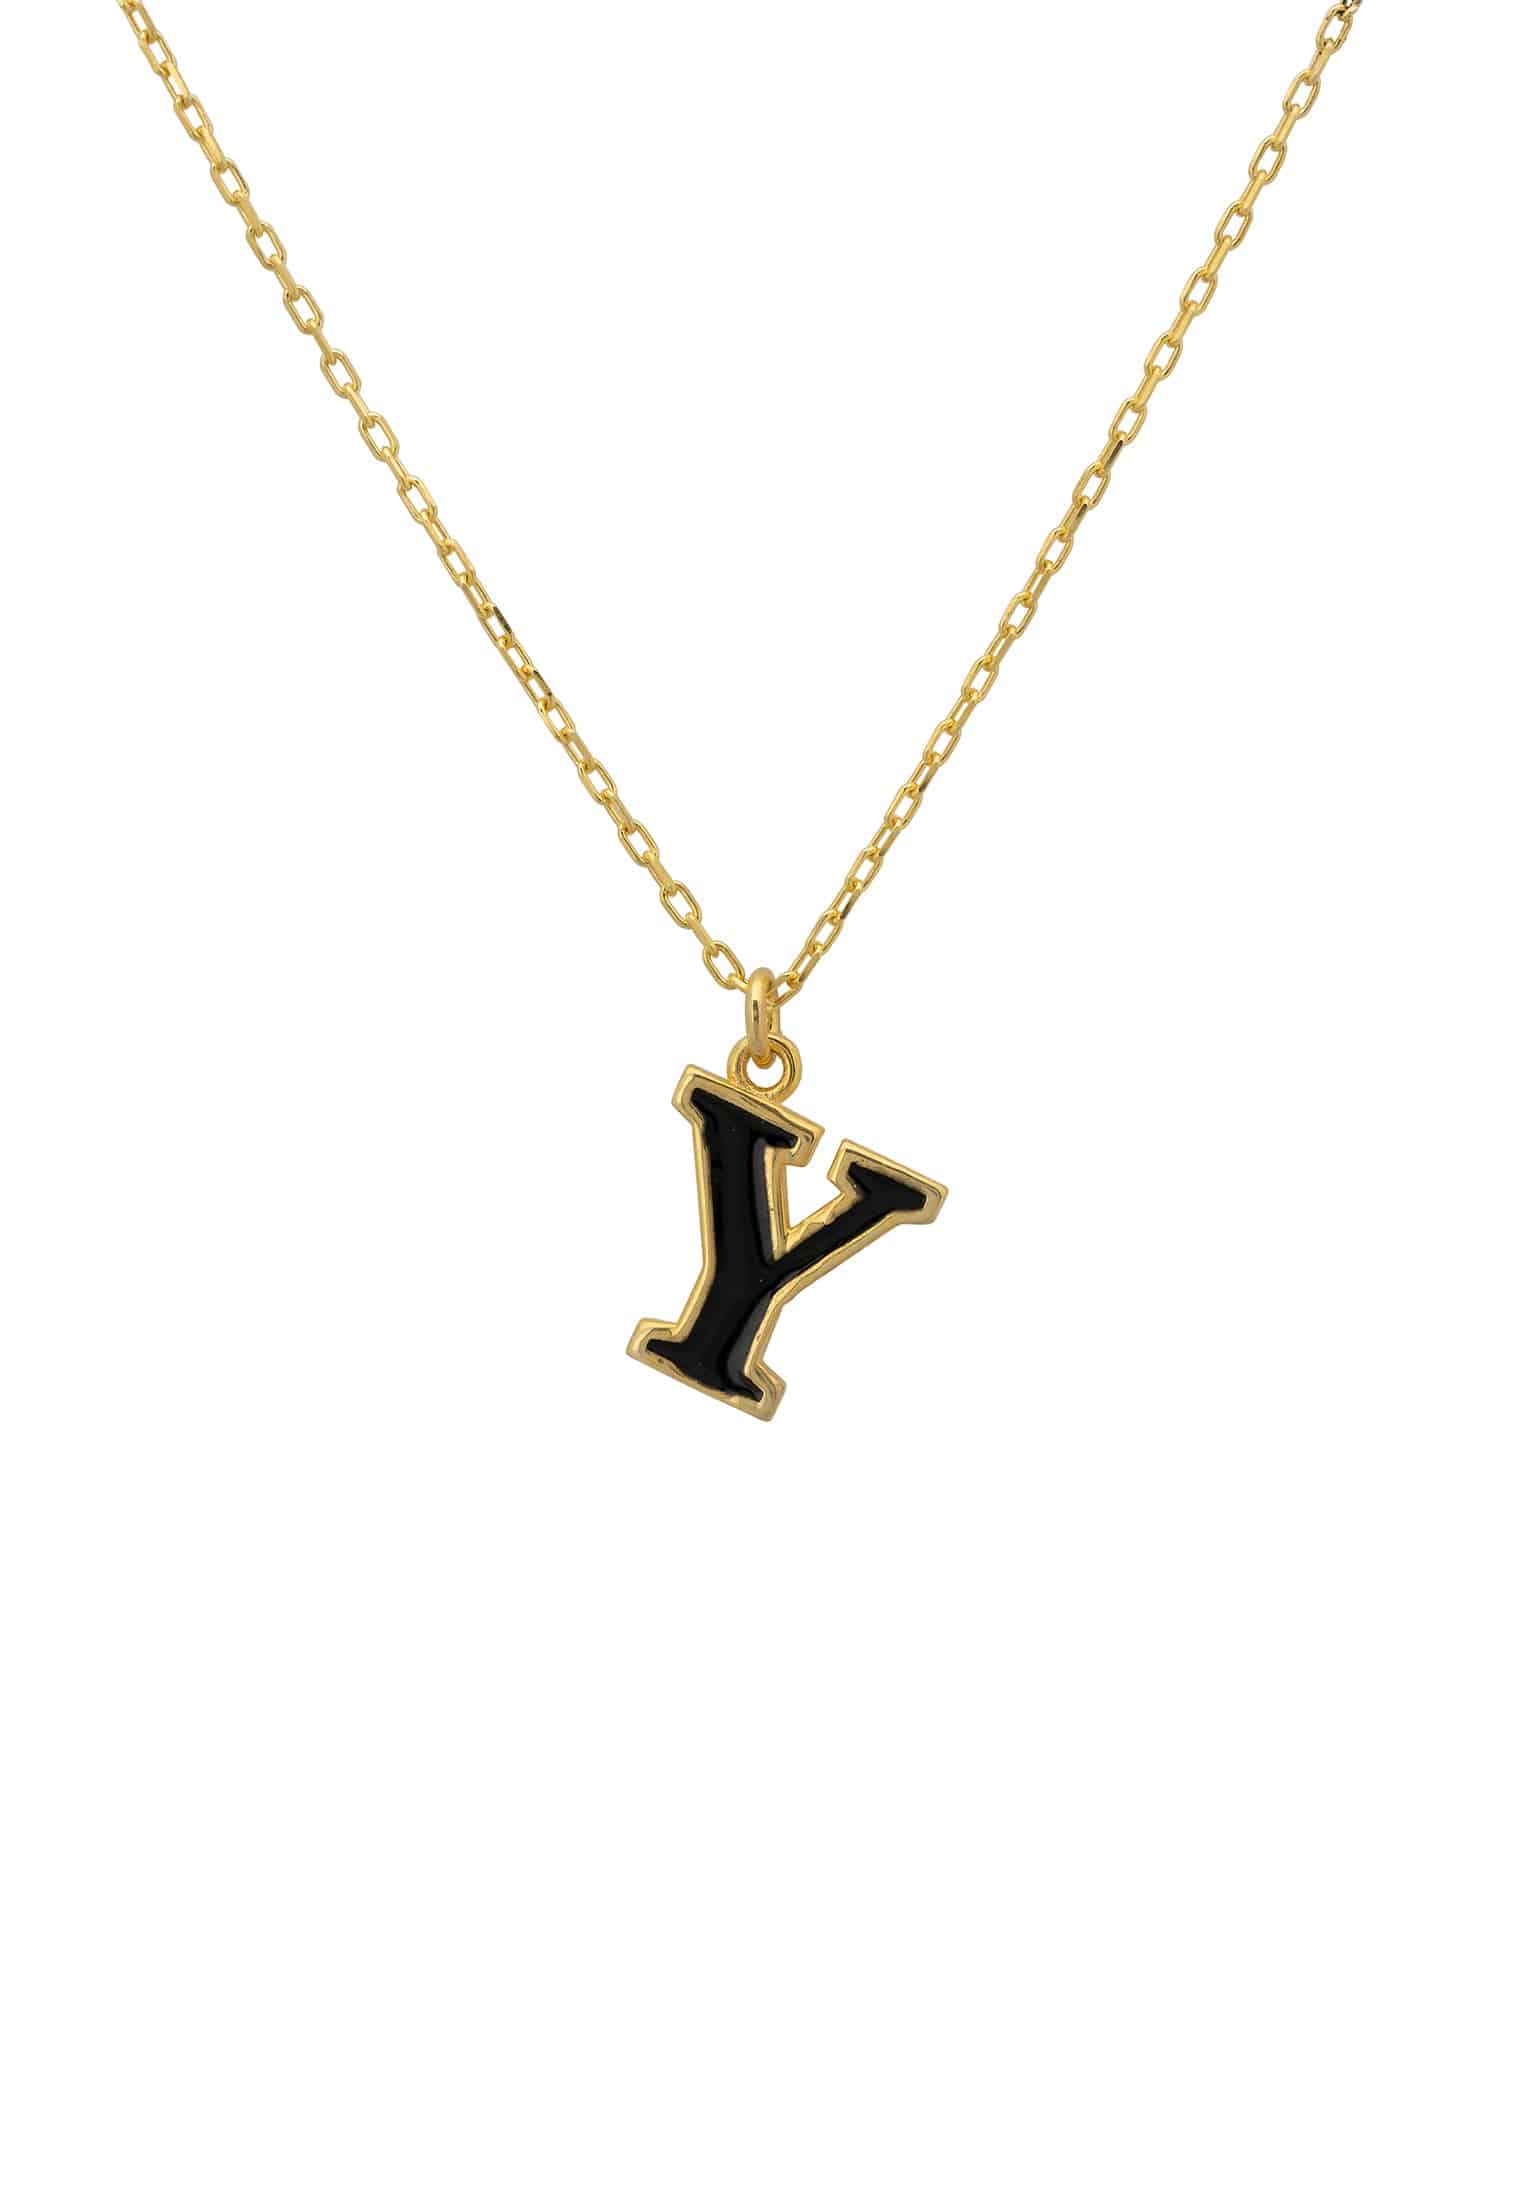 Delicate Initial Enamel Pendant Necklace in Gold - Personalized Birthday Gift Idea Bijou Her